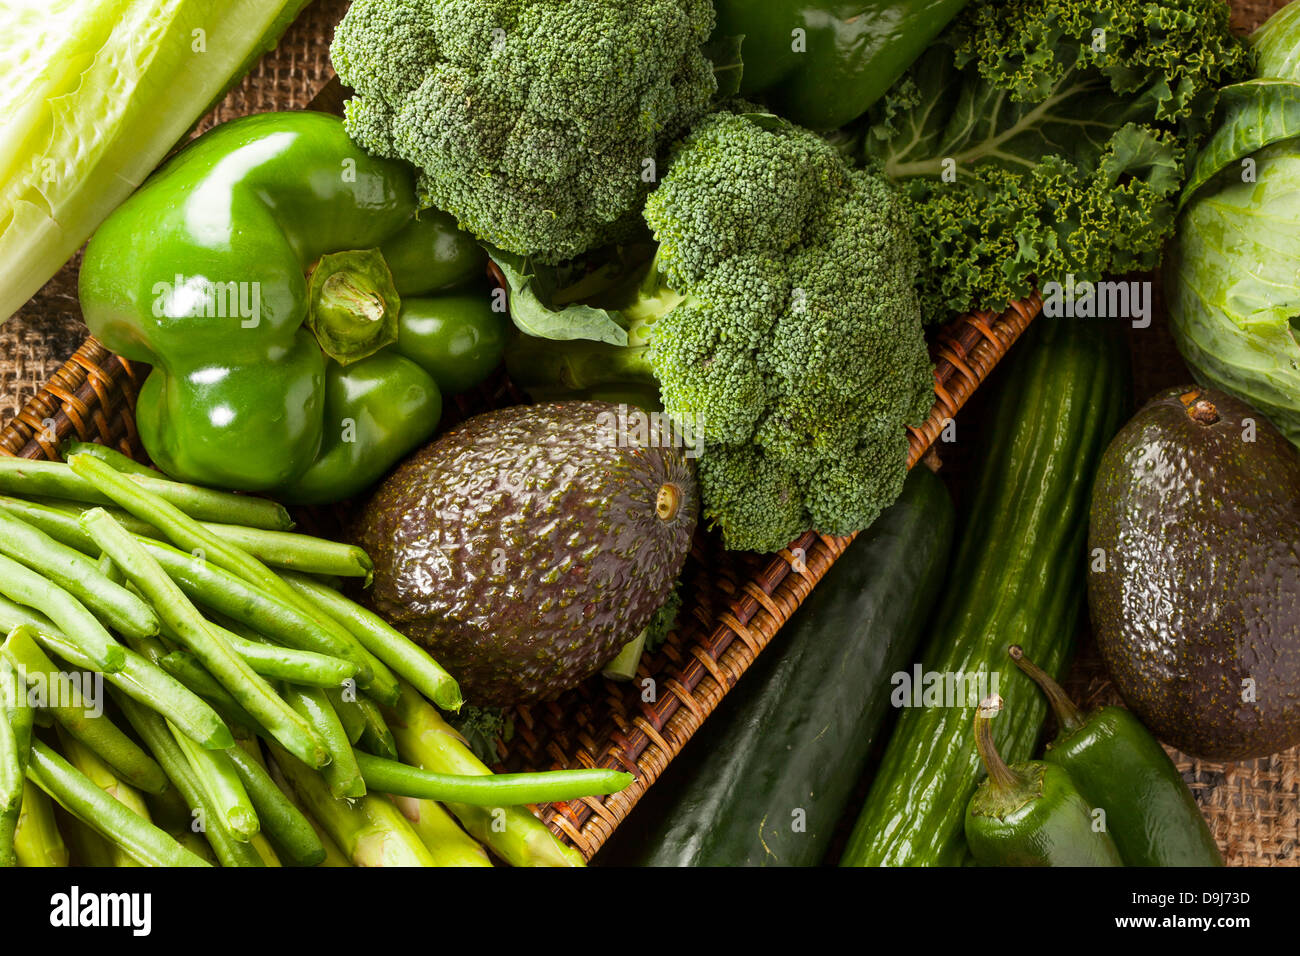 Group of Raw Fresh Organic Assorted Green Vegetables Stock Photo - Alamy